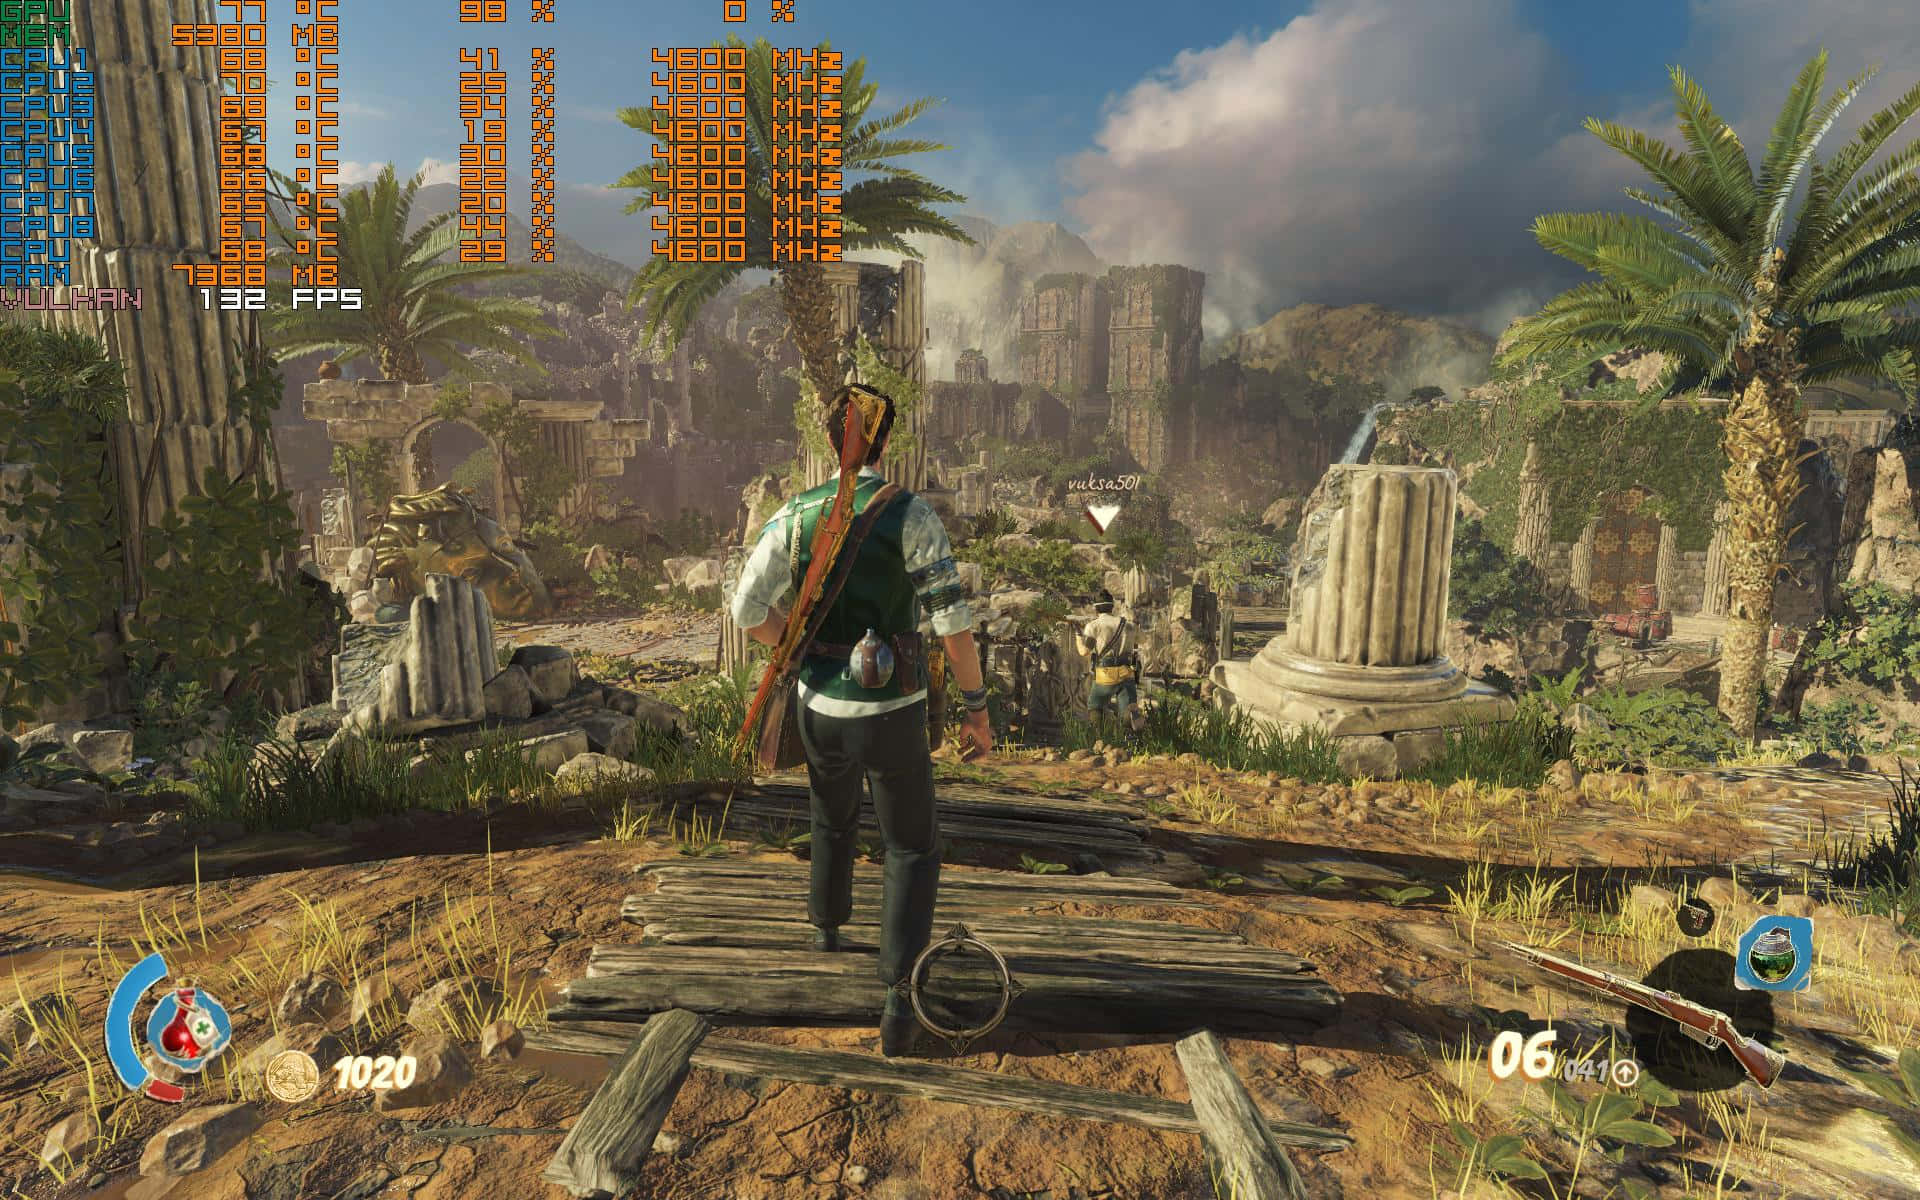 A Screenshot Of A Video Game With A Man Standing On A Platform